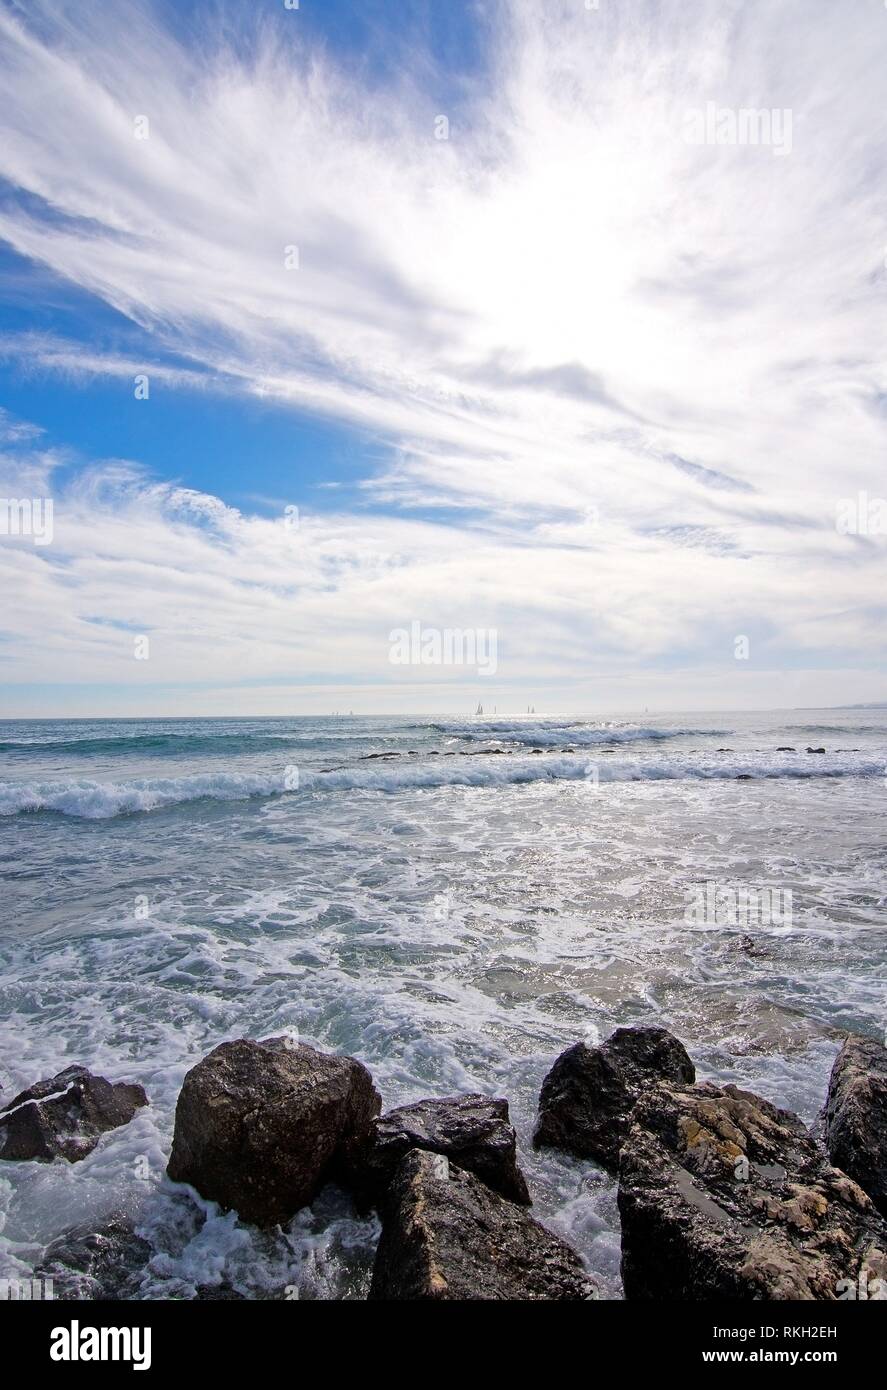 Natural Mediterranean winter seascape with waves and sails on the horizon in Mallorca, Balearic islands, Spain. Stock Photo